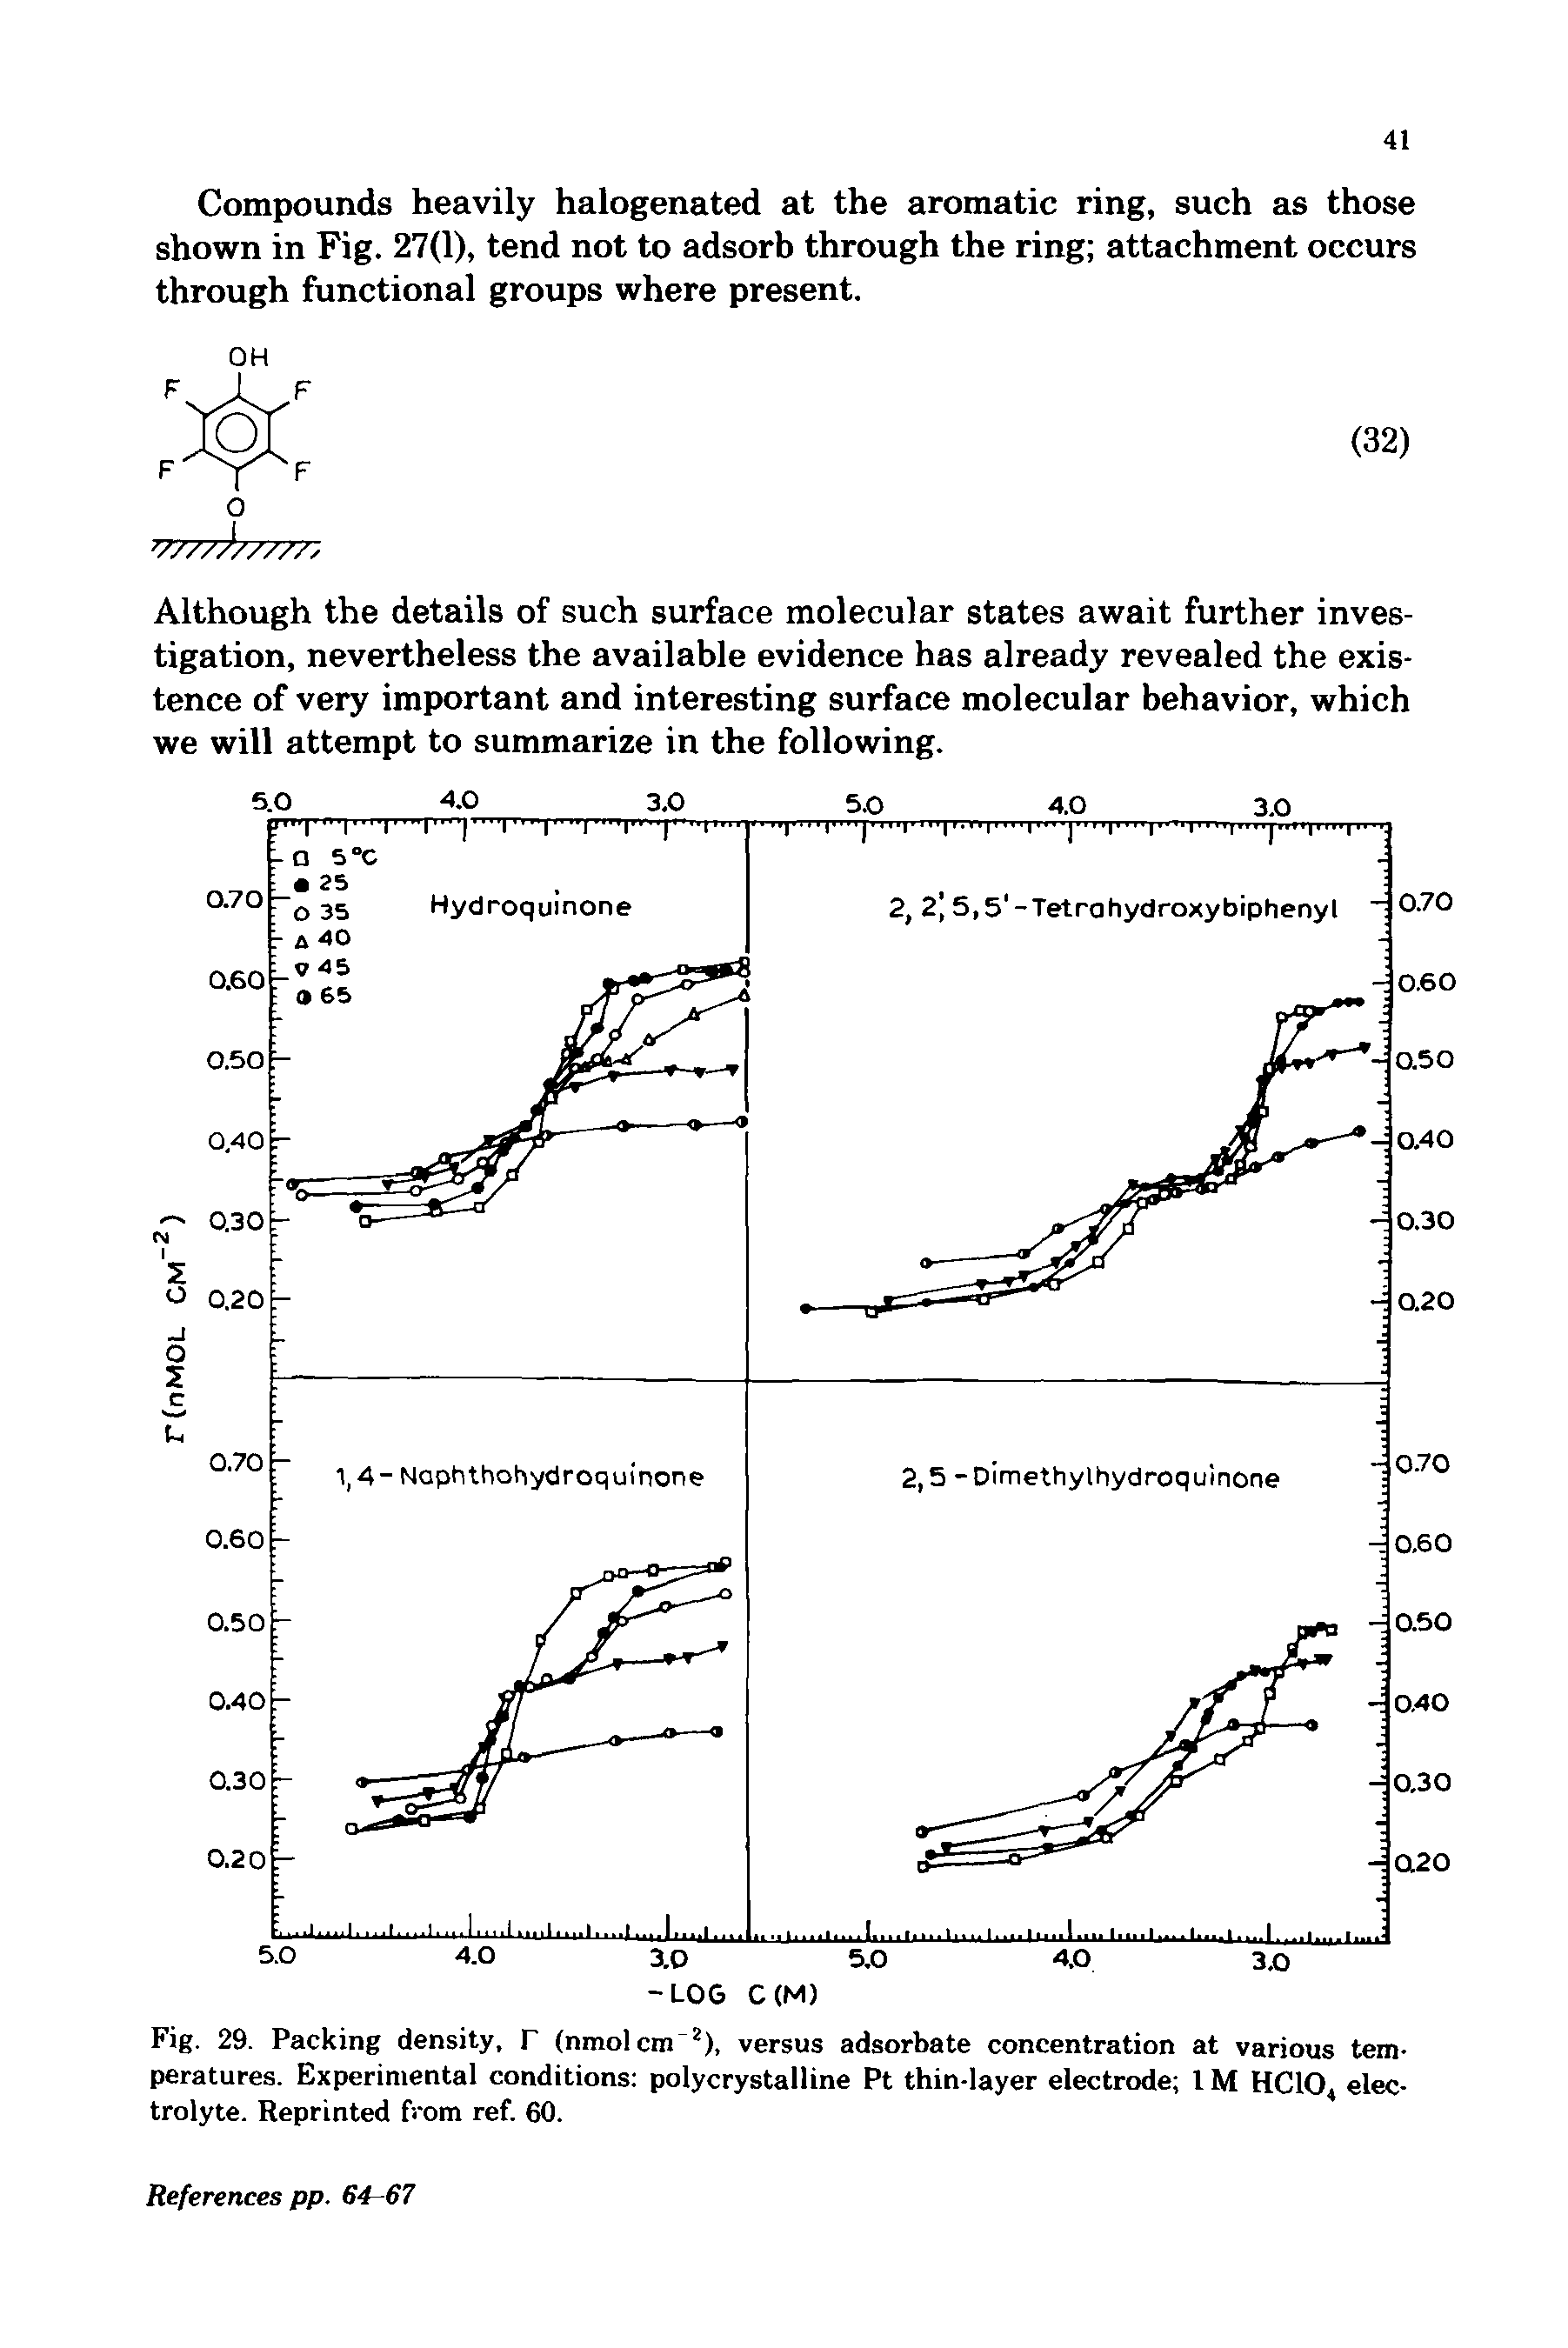 Fig. 29. Packing density, r (nmol cm 2), versus adsorbate concentration at various temperatures. Experimental conditions polycrystalline Pt thin-layer electrode 1M HC104 electrolyte. Reprinted from ref. 60.